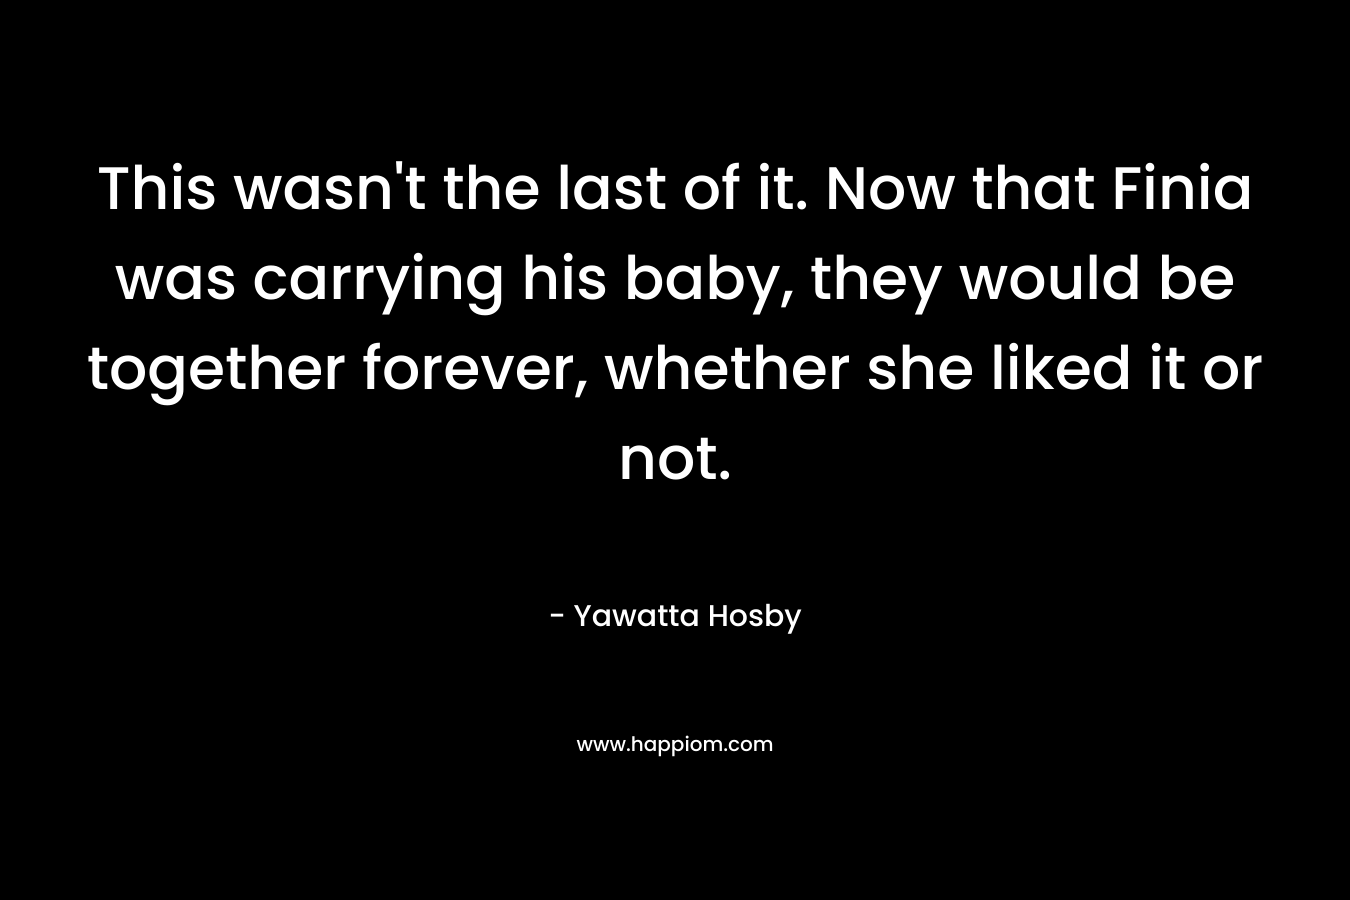 This wasn’t the last of it. Now that Finia was carrying his baby, they would be together forever, whether she liked it or not. – Yawatta Hosby